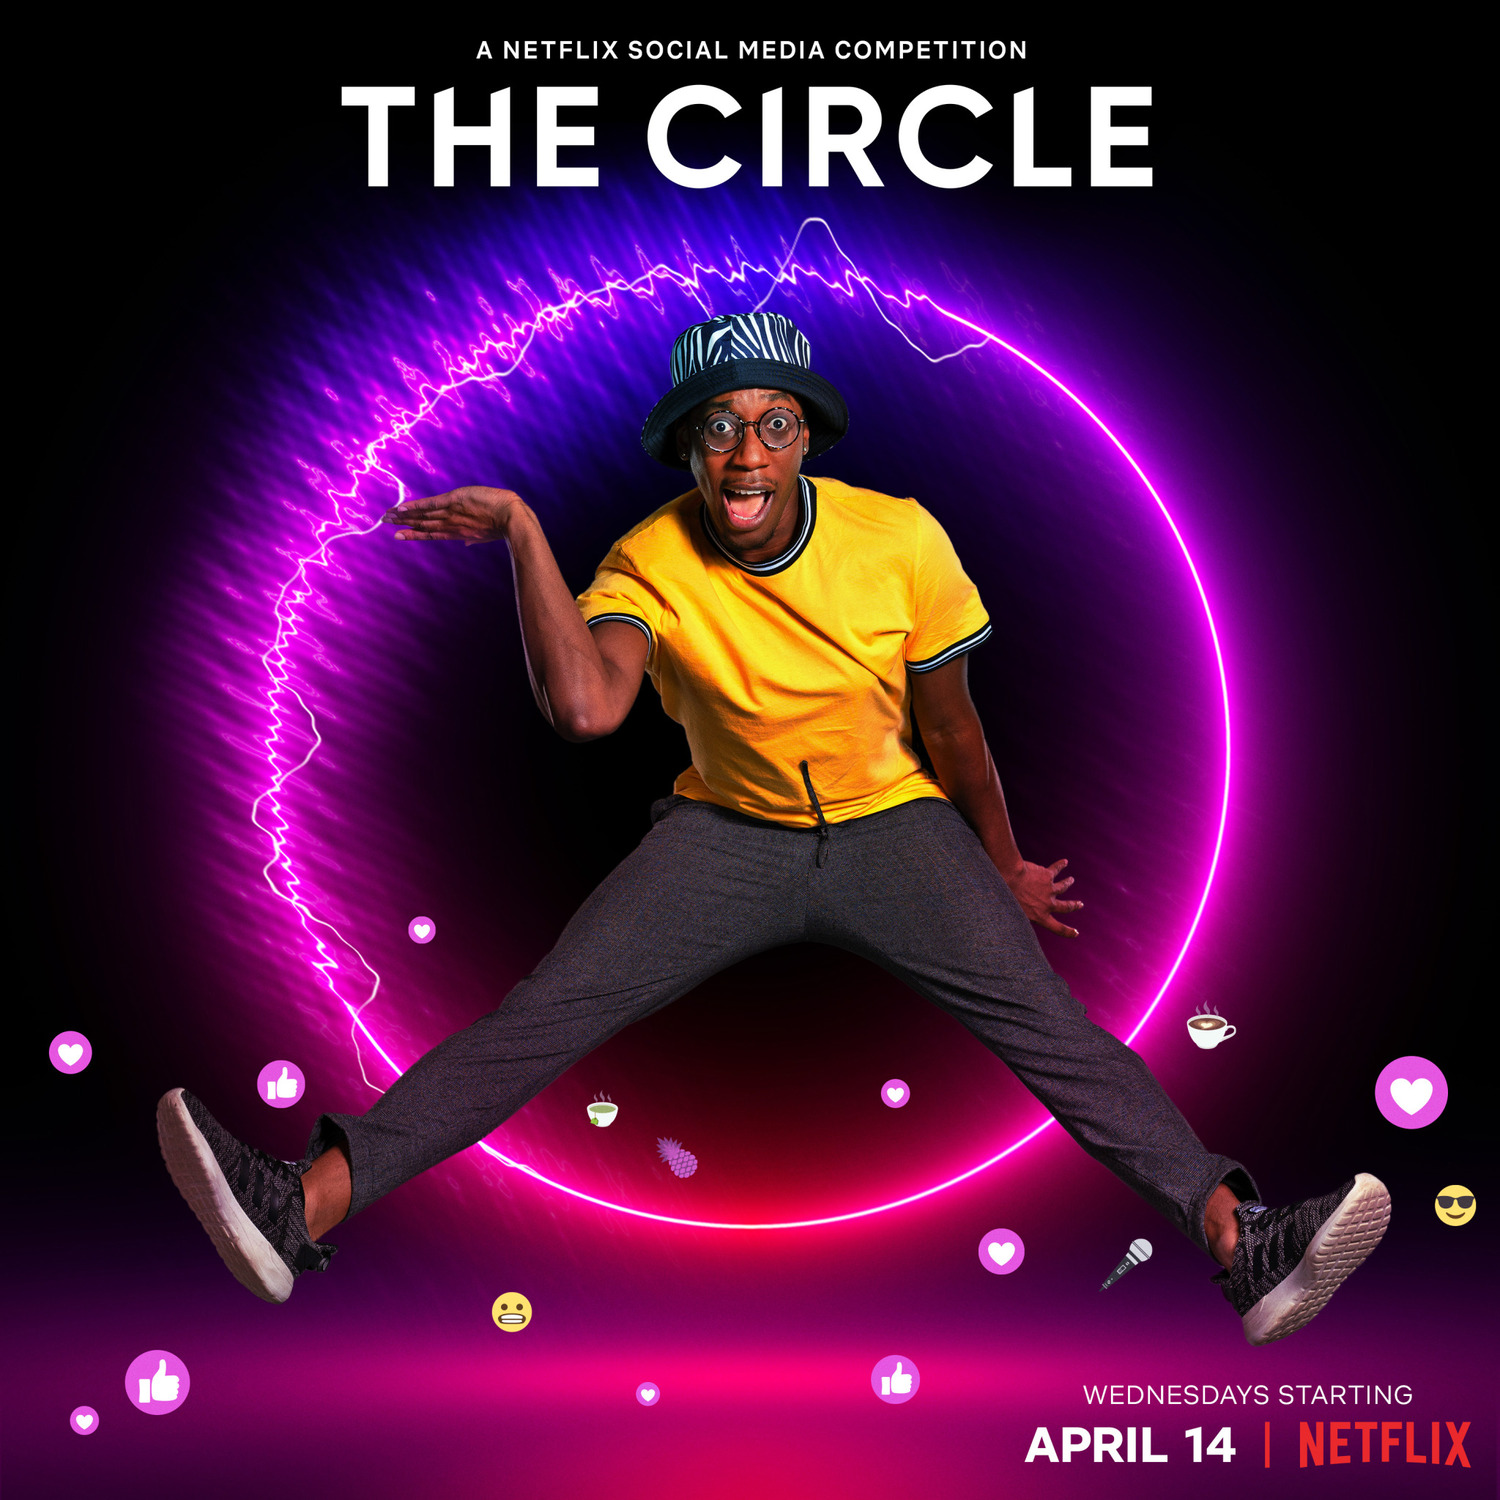 Extra Large TV Poster Image for The Circle (#8 of 23)